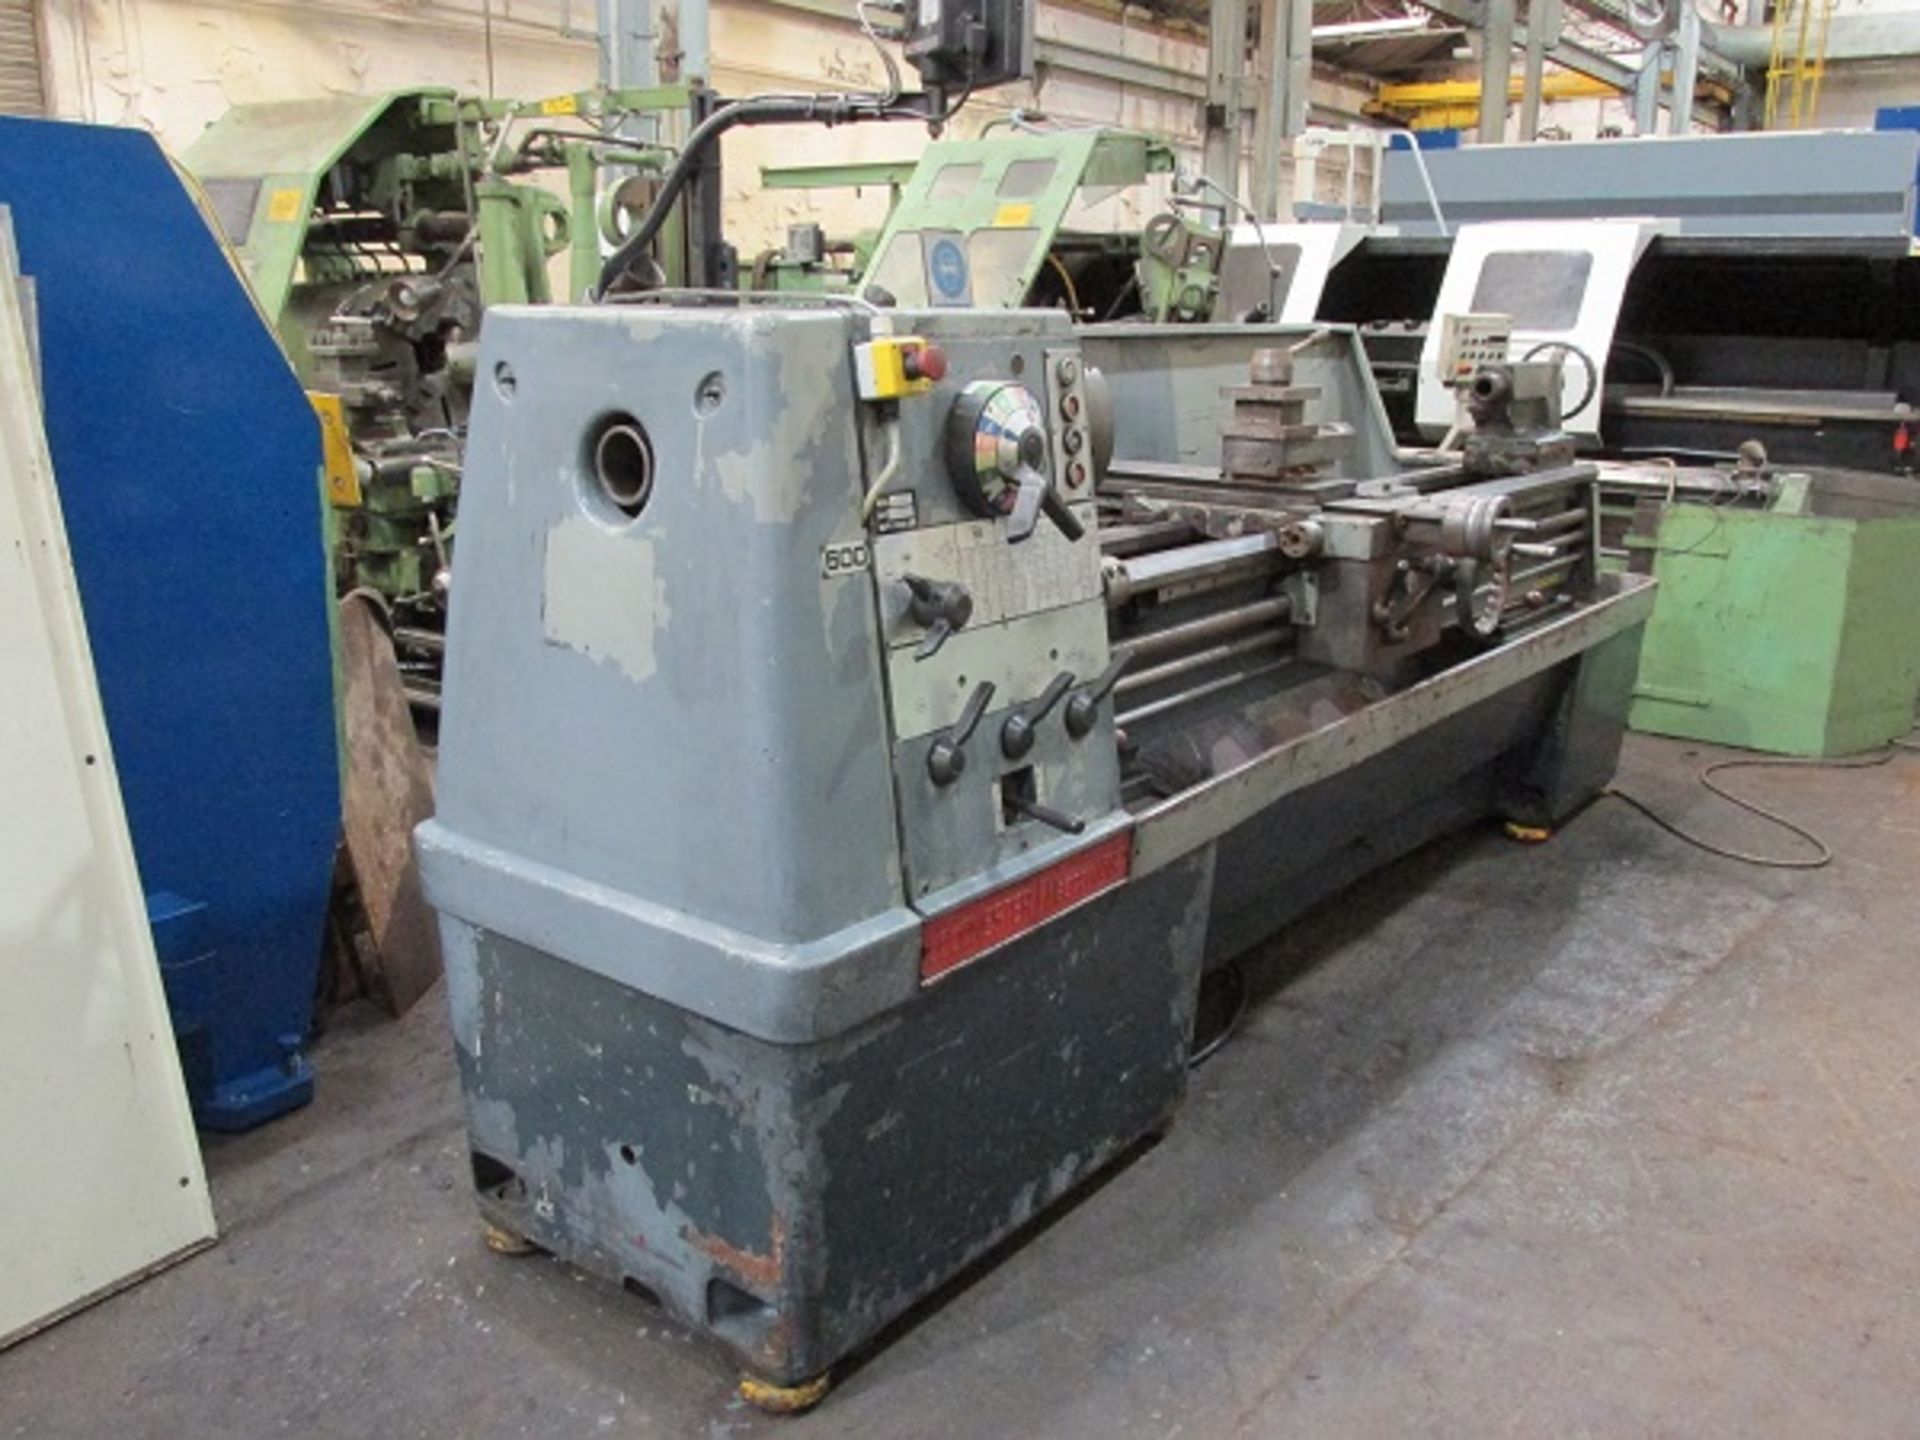 Colchester Mascot 1600 Gap Bed Lathe x 2000mm - Image 4 of 6